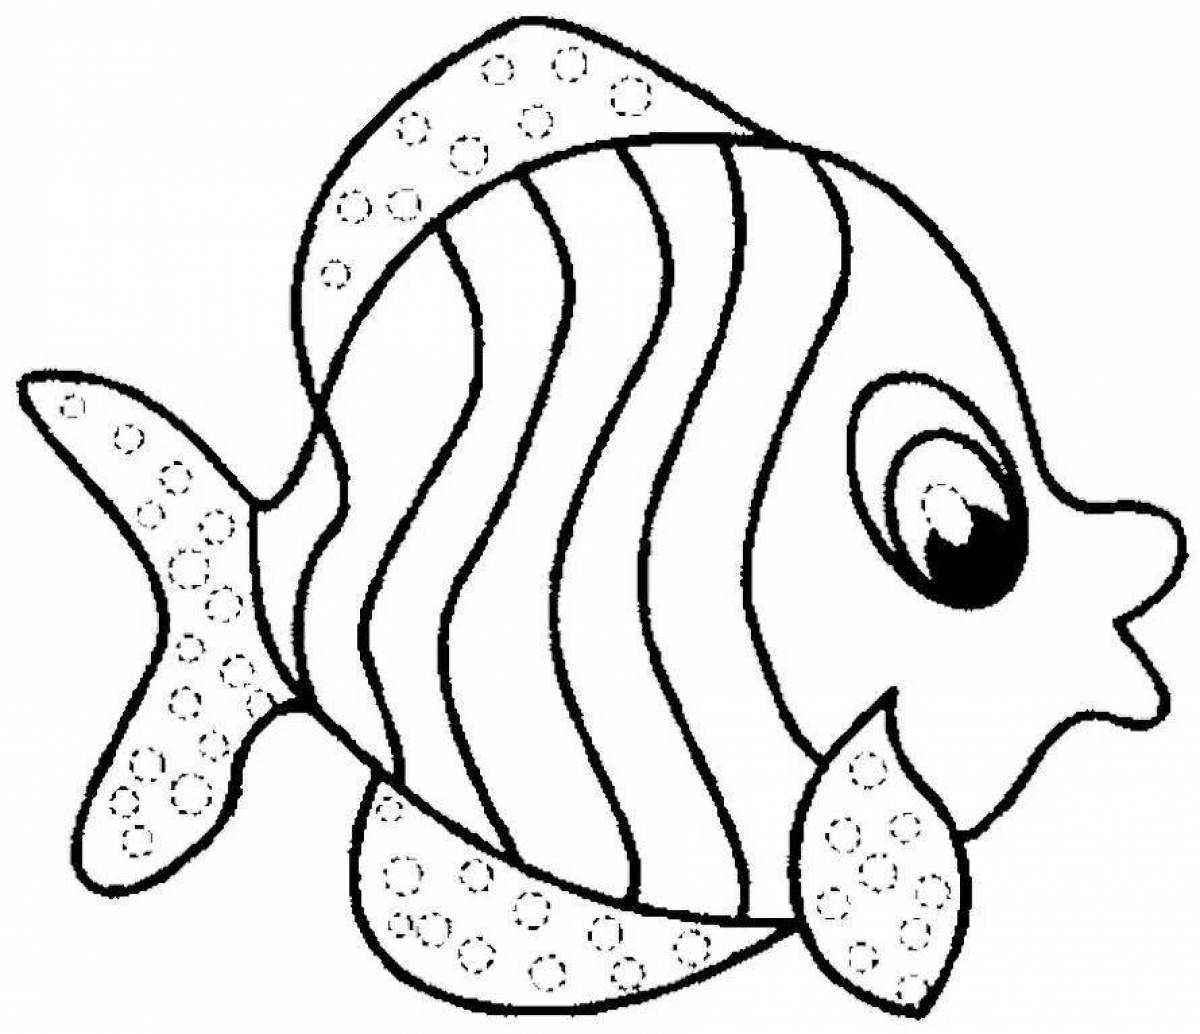 Exciting fish coloring book for 3-4 year olds